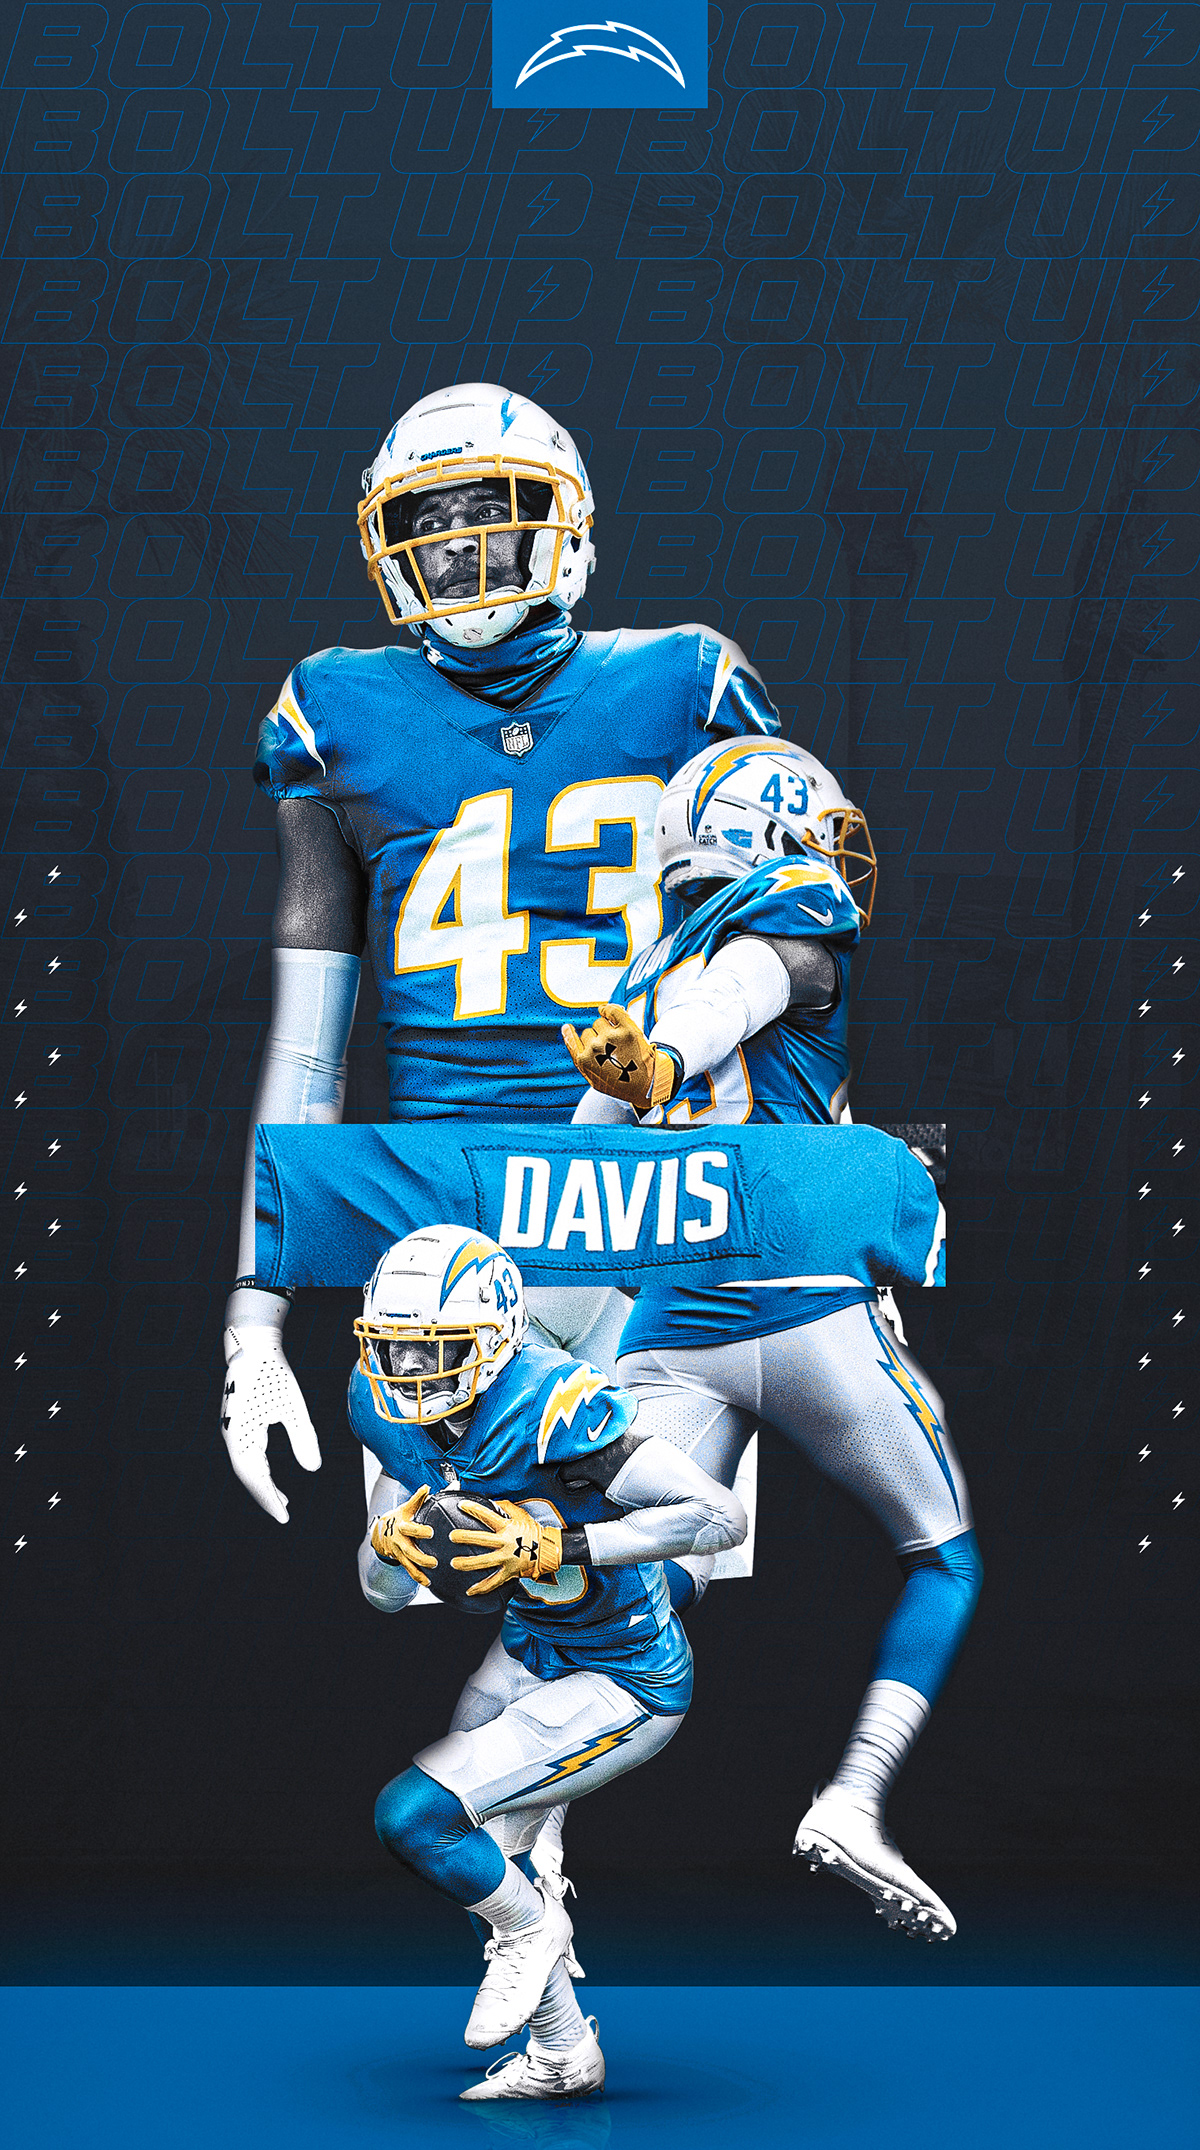 Chargers Wallpapers